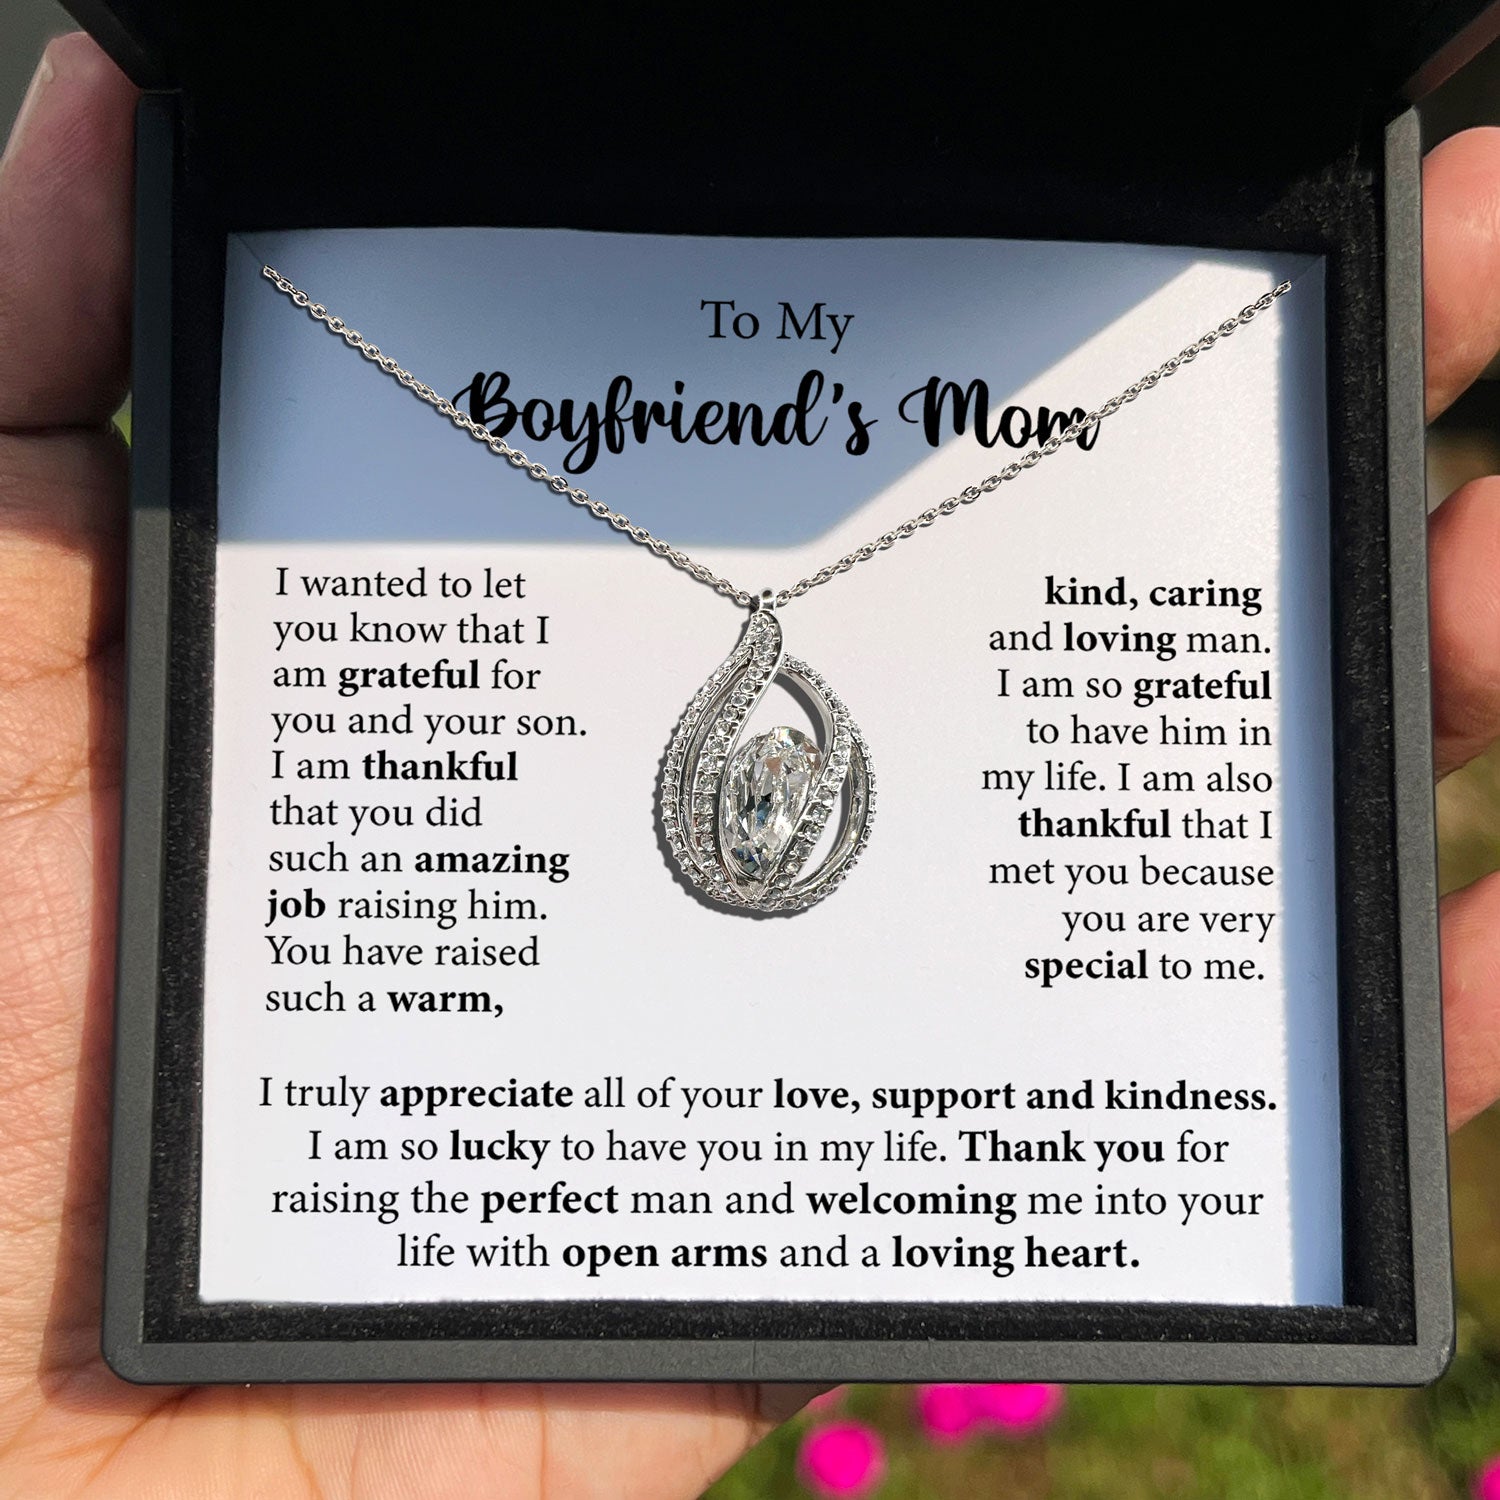 To My Boyfriend's Mom - I Truly Appreciate All of Your Love,Support And Kindness - Orbital Birdcage Necklace